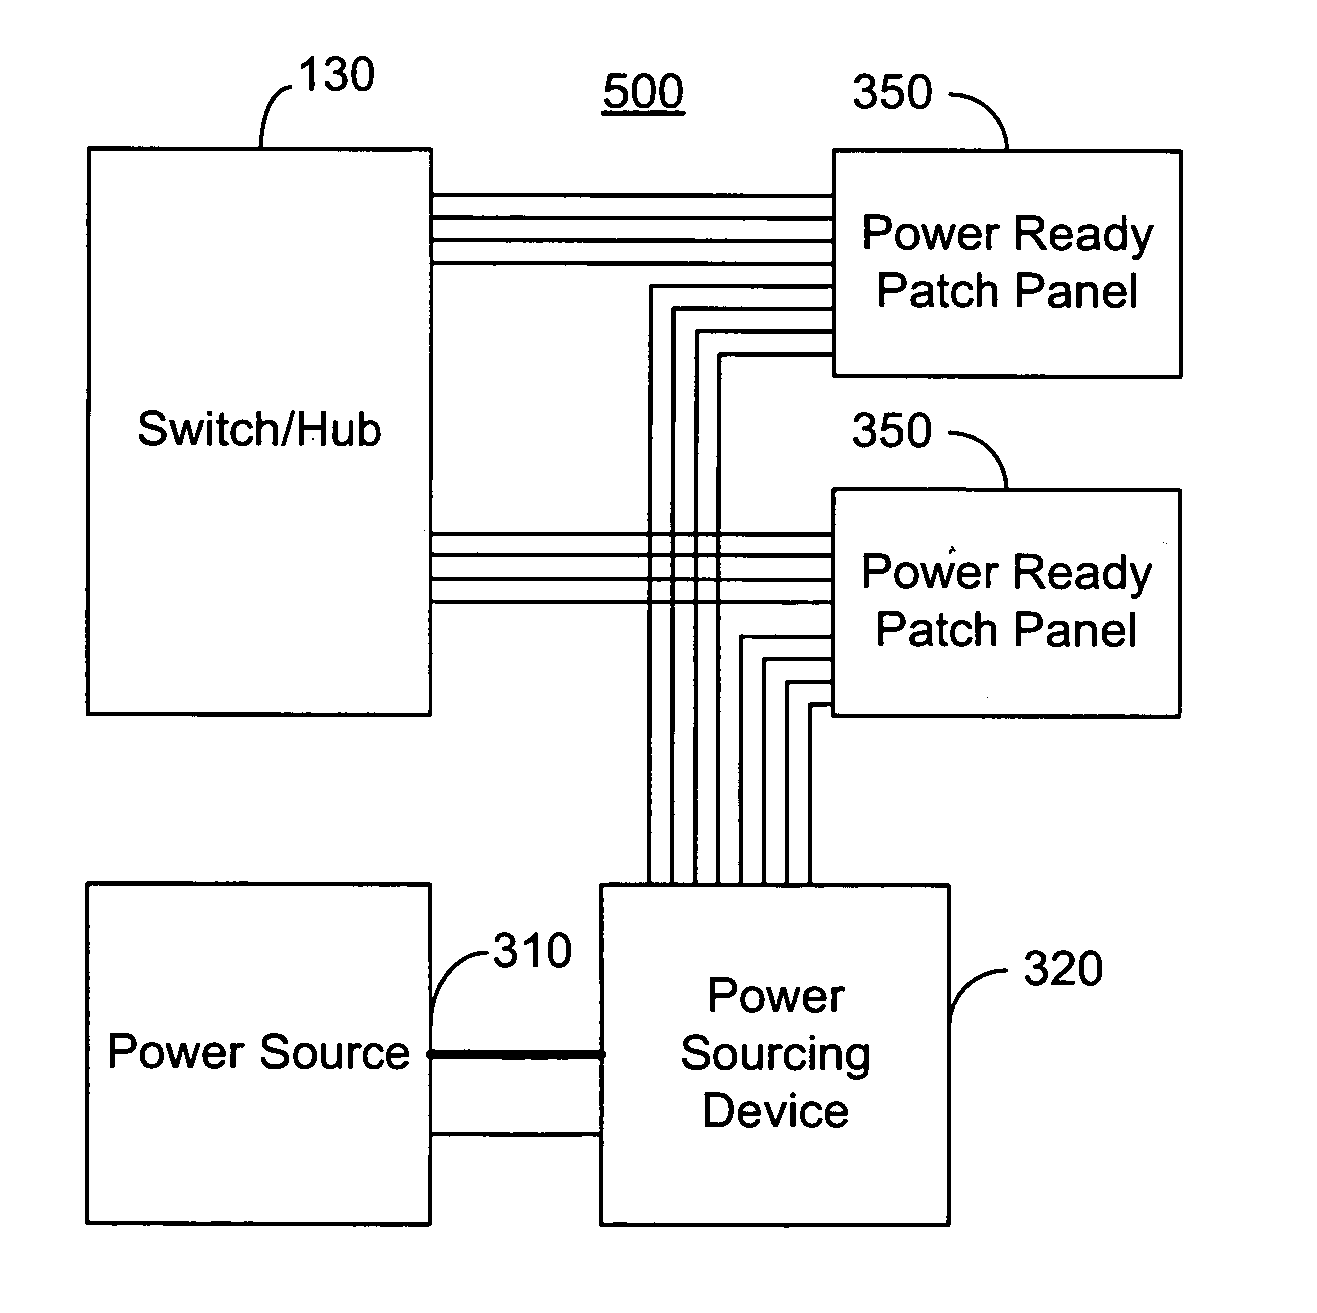 System for providing power over Ethernet through a patch panel